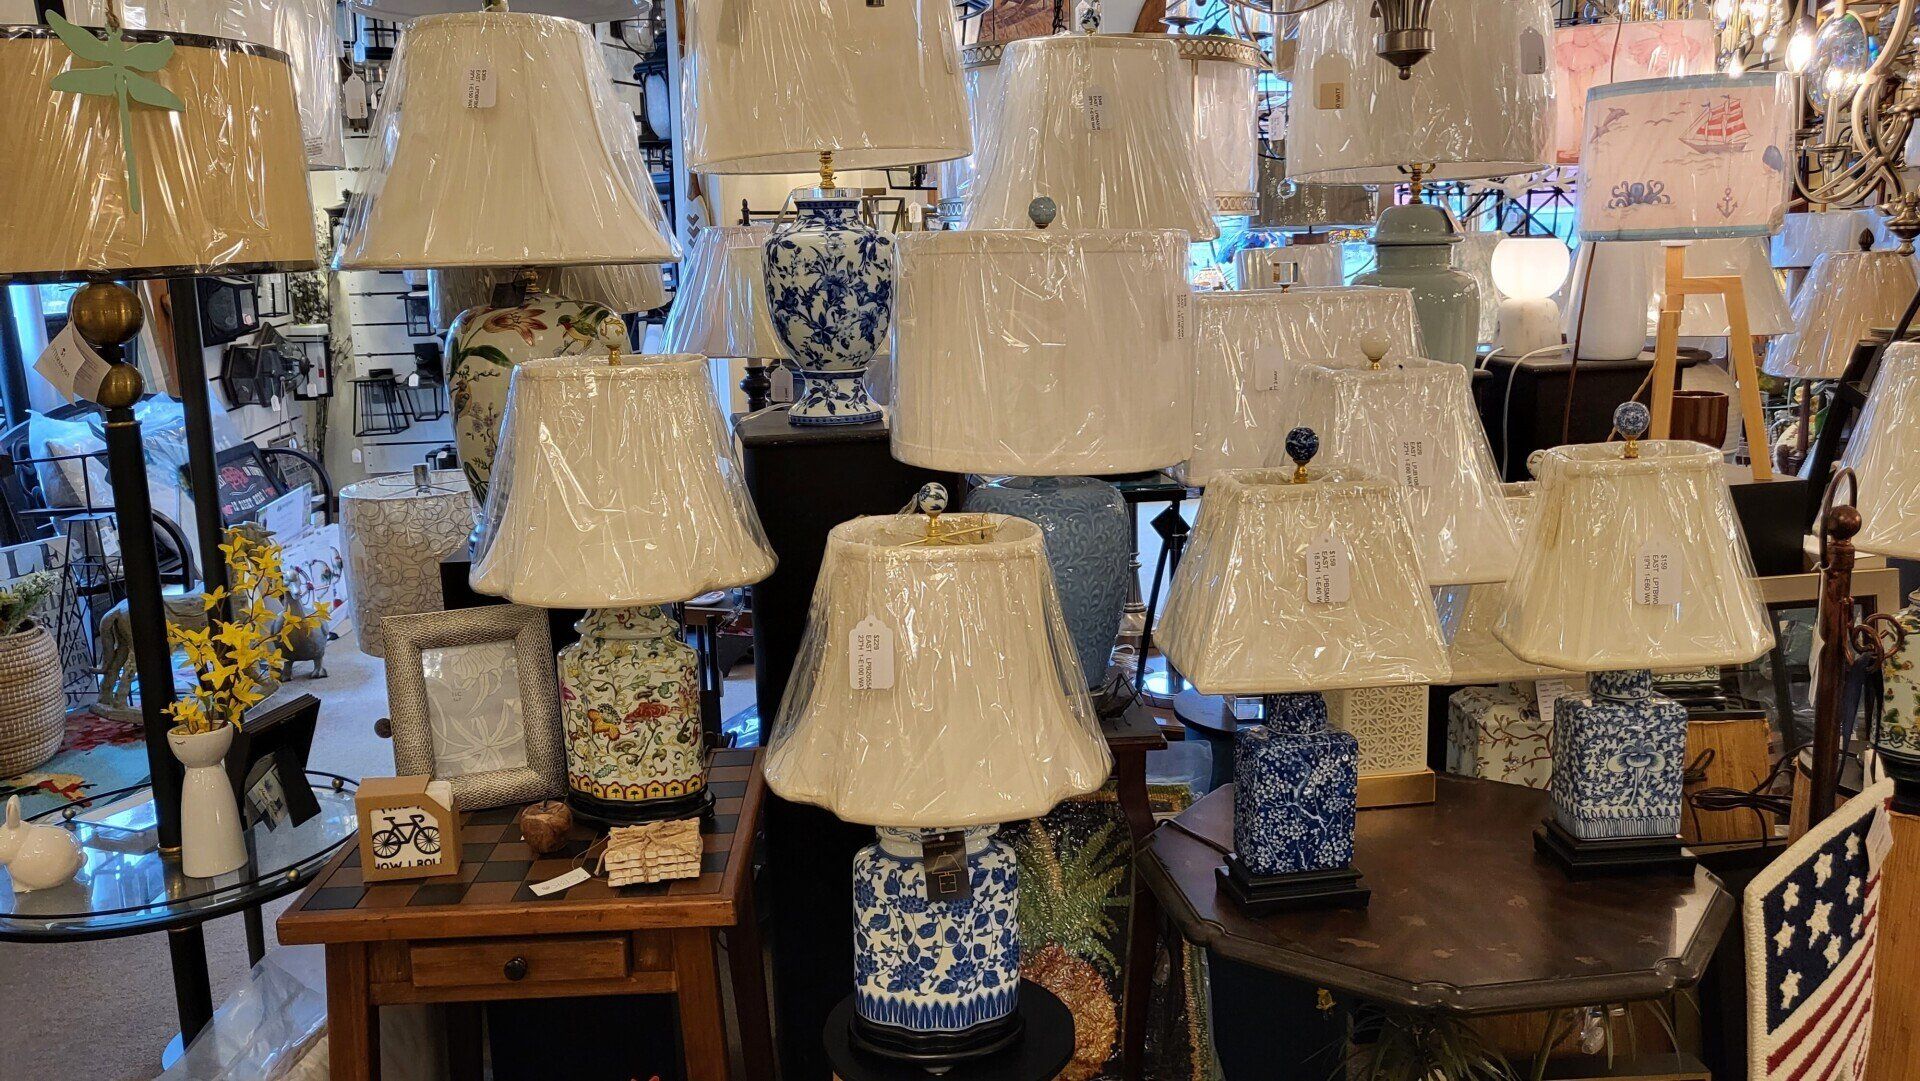 blue and white lamps are on display in a store #local #ct #avon #tablelamps #tablelamp #nearme #near #wheretobuy #x